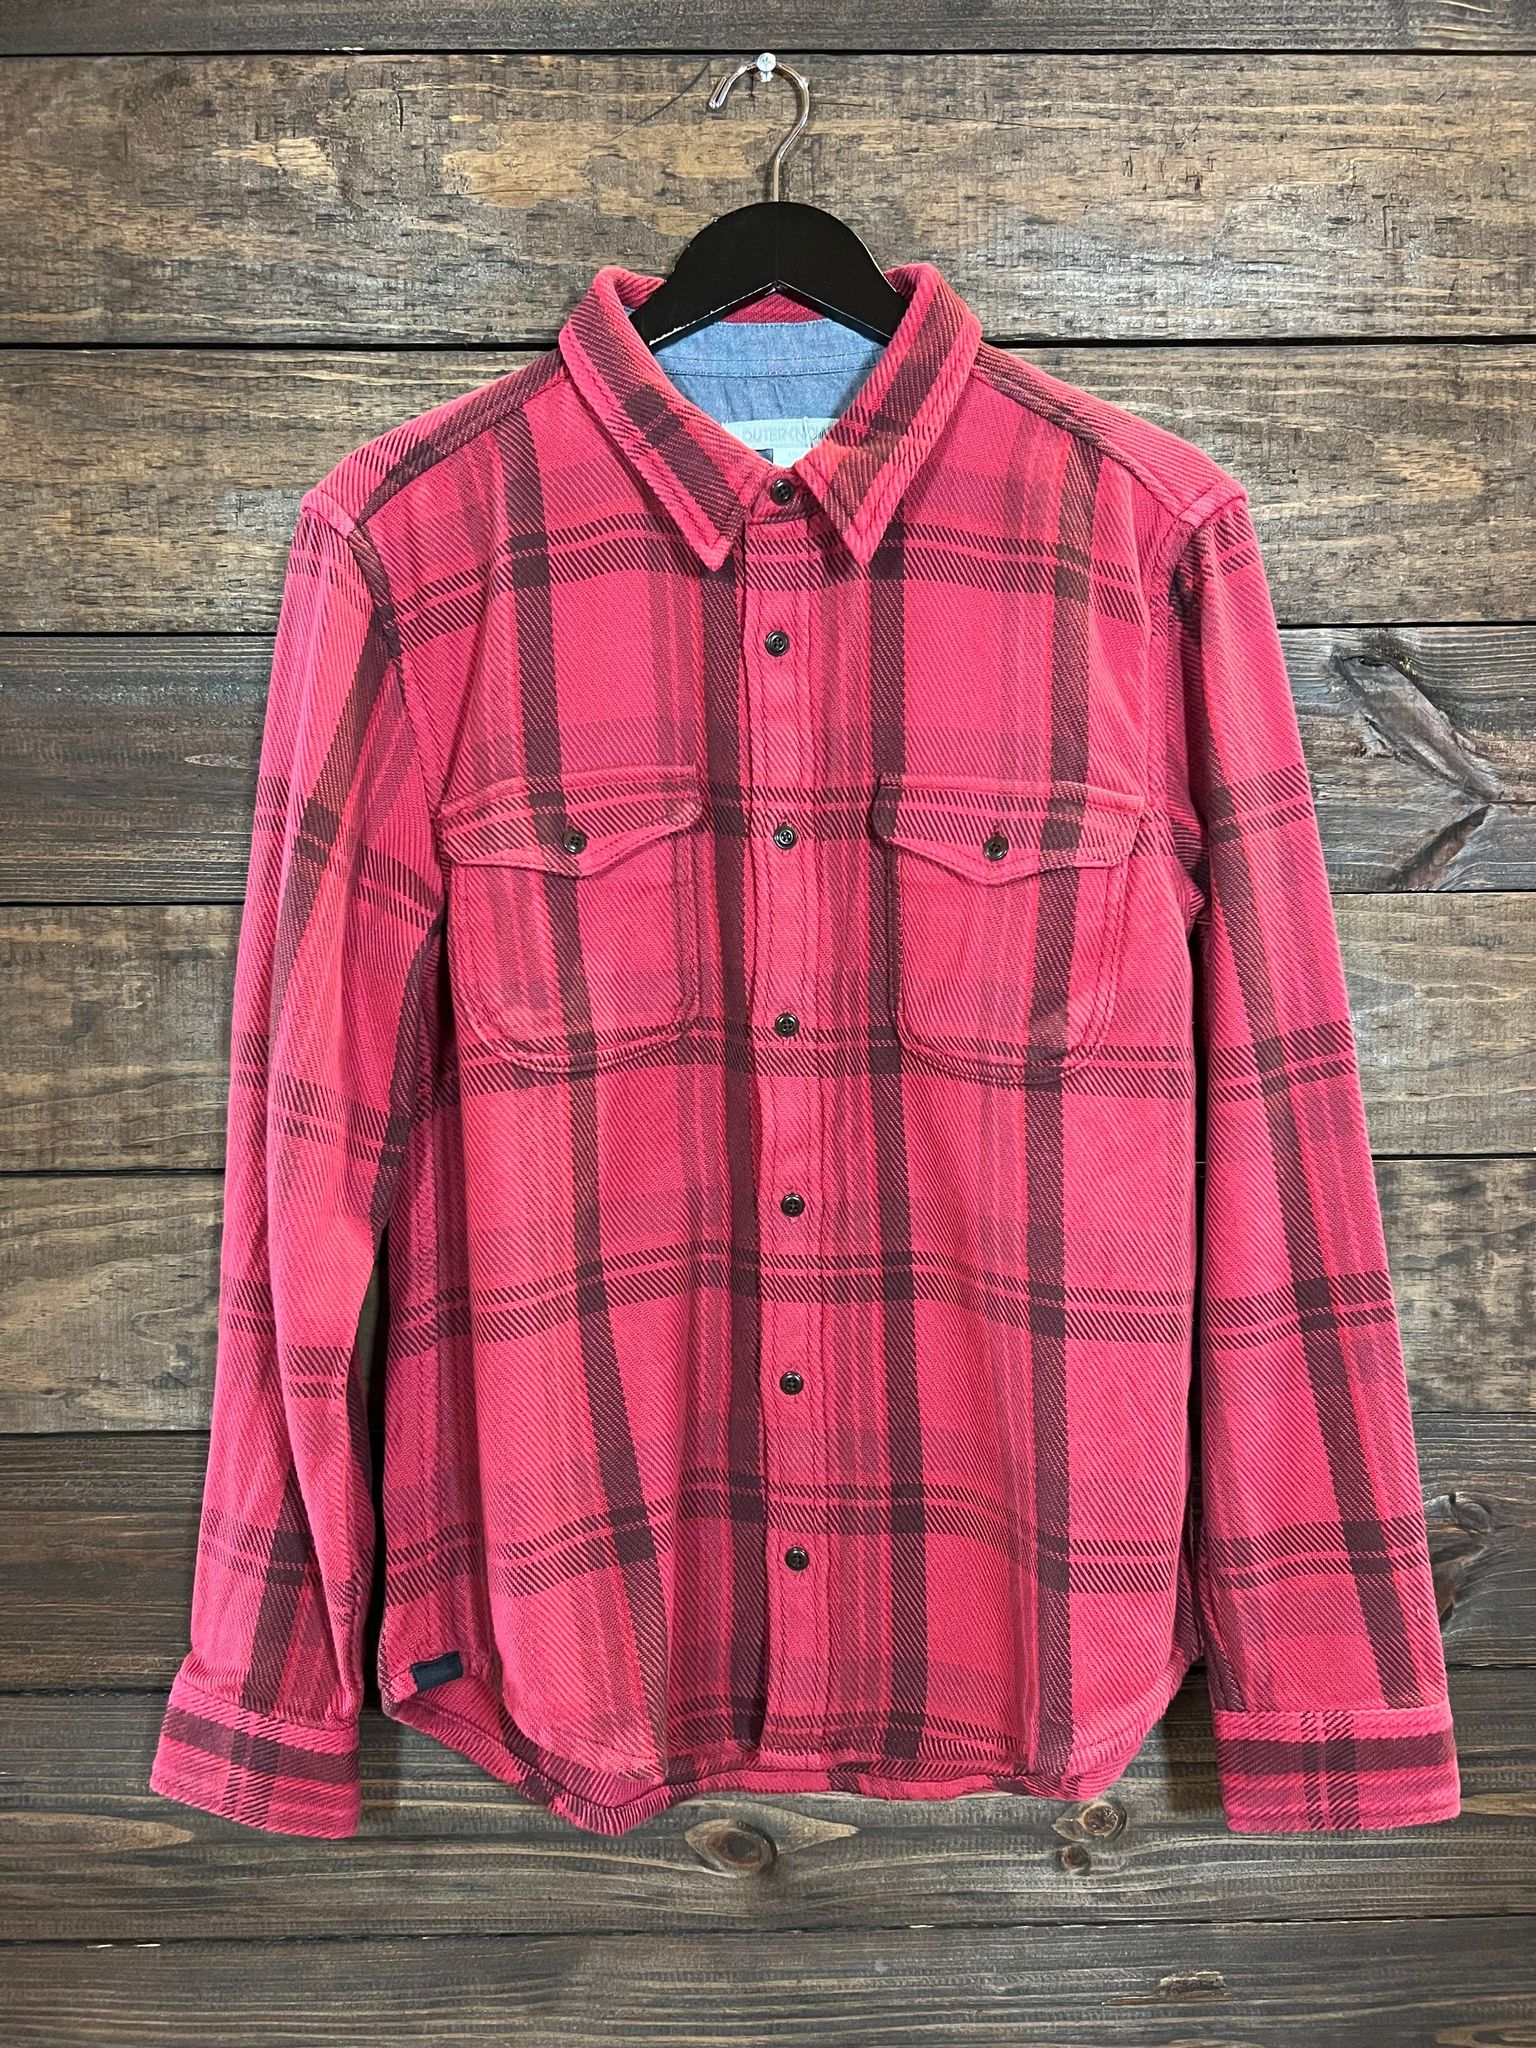 Outerknown - Blanket Shirt - Dusty Red Cusco